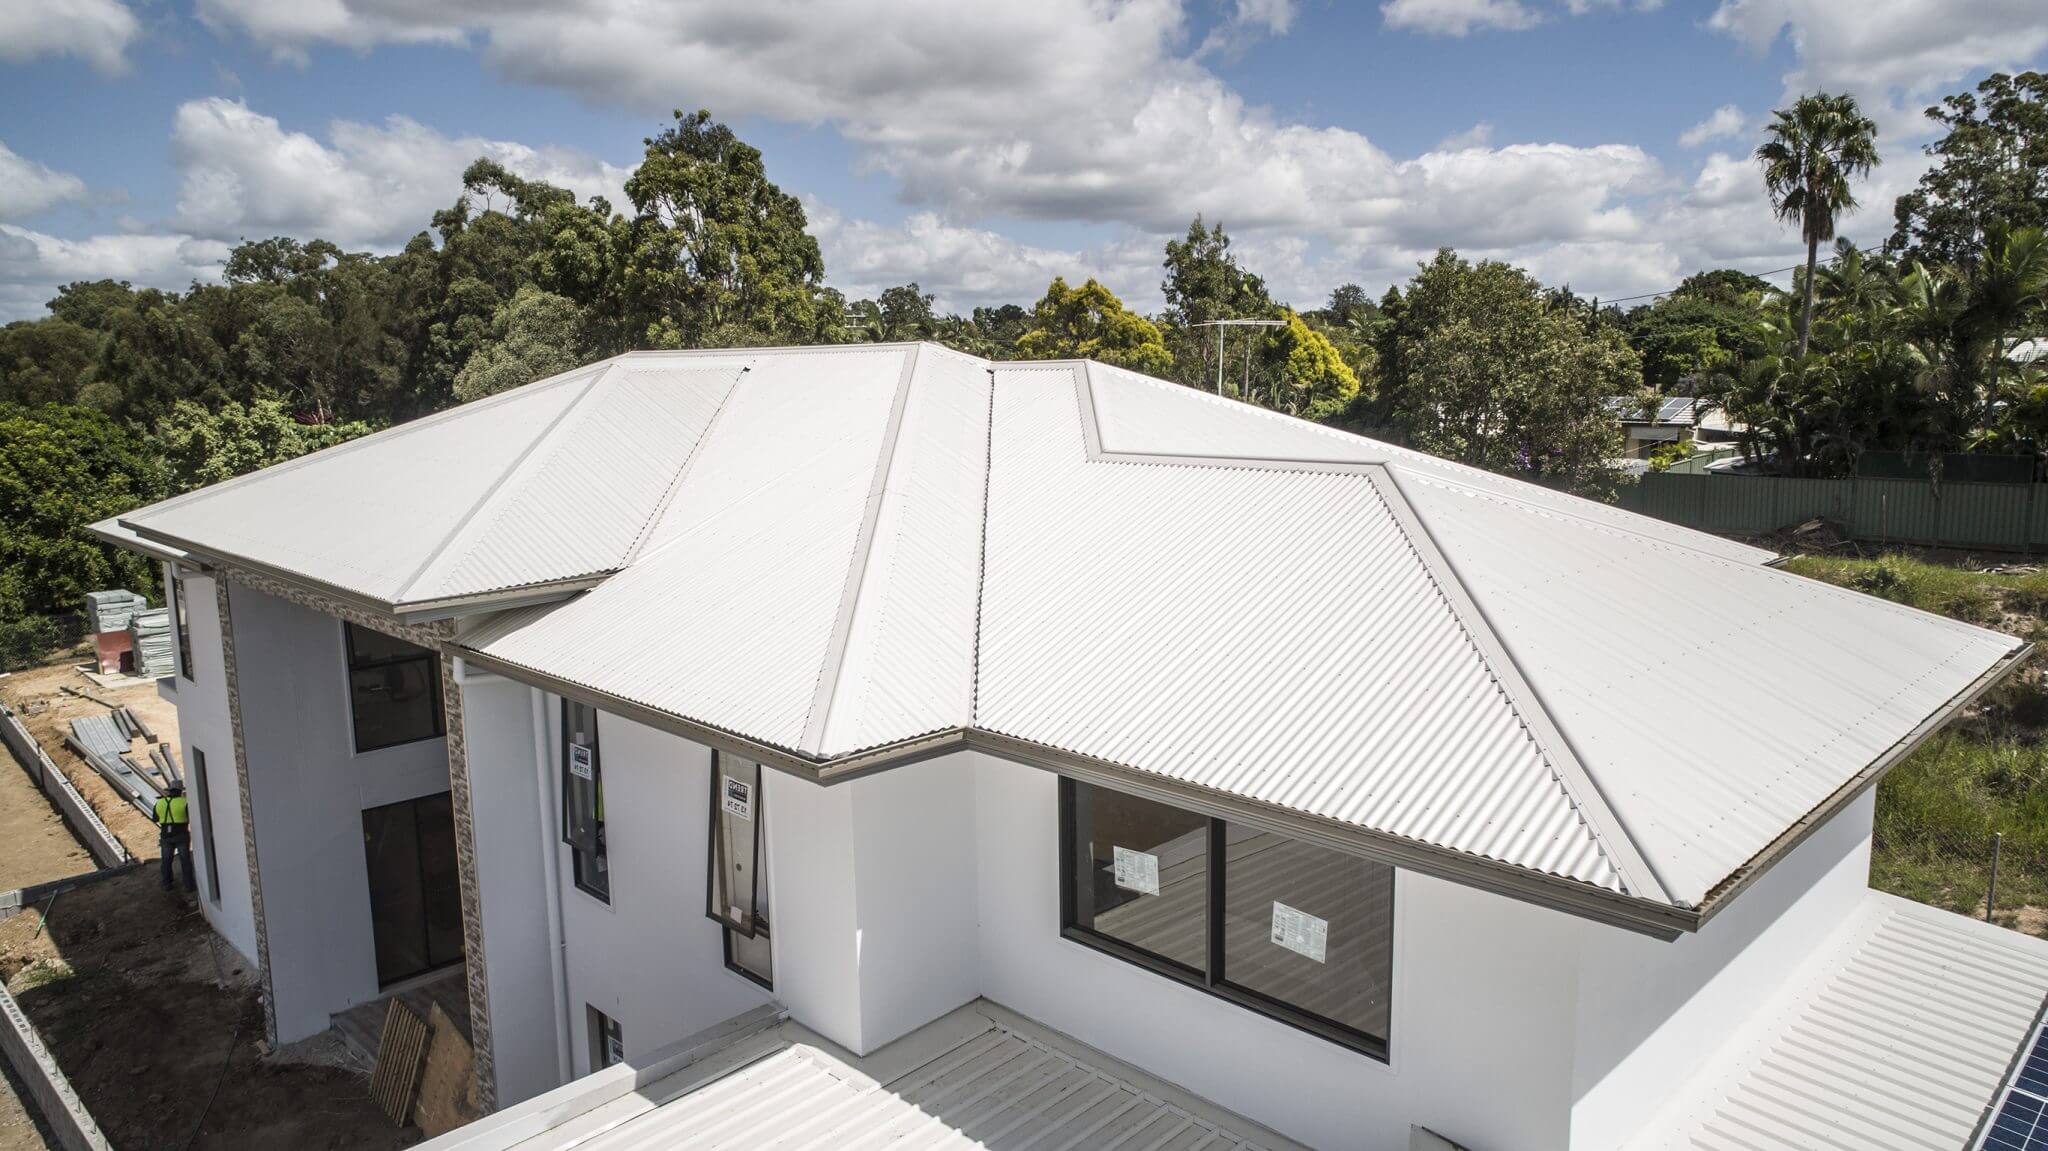 Duplex house under construction with Colorbond® metal roofing